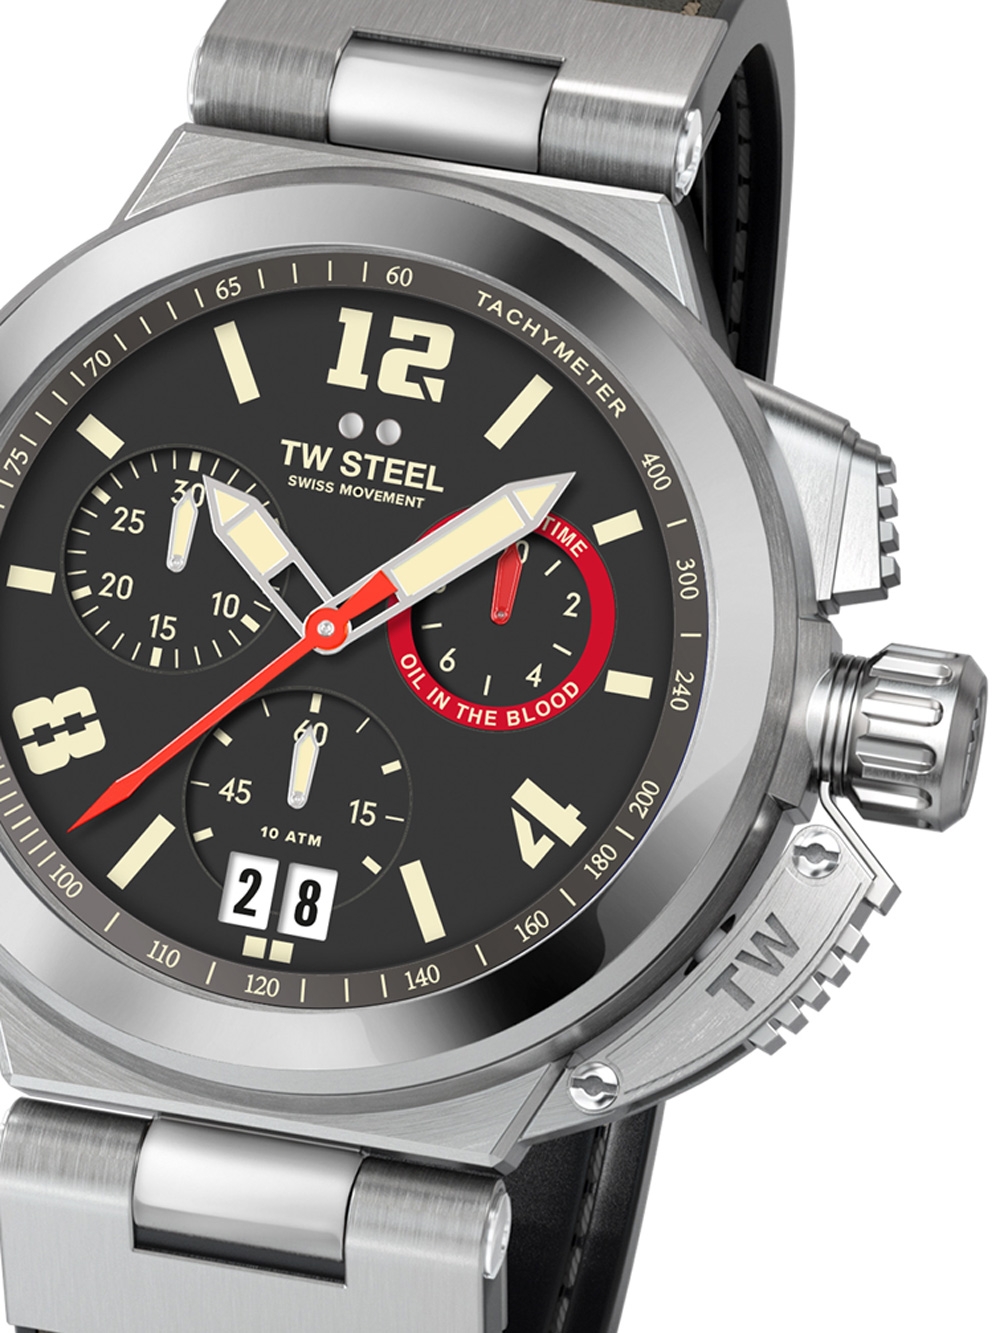 TW-Steel TW999 Oil in the blood Ltd. Chronograph 46mm 20ATM